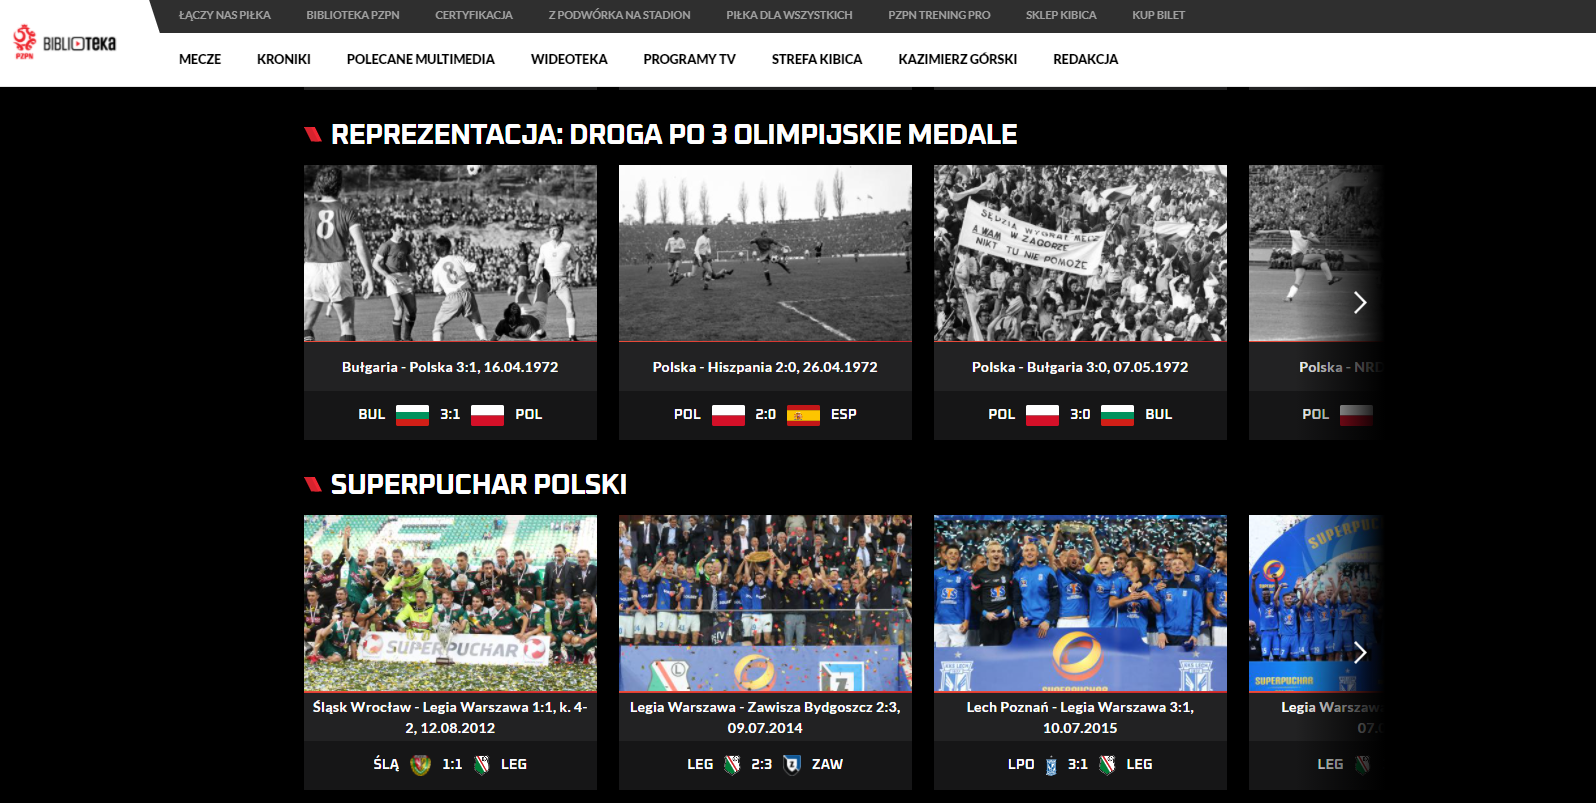 The PZPN library is an interactive website containing many  recordings from the matches